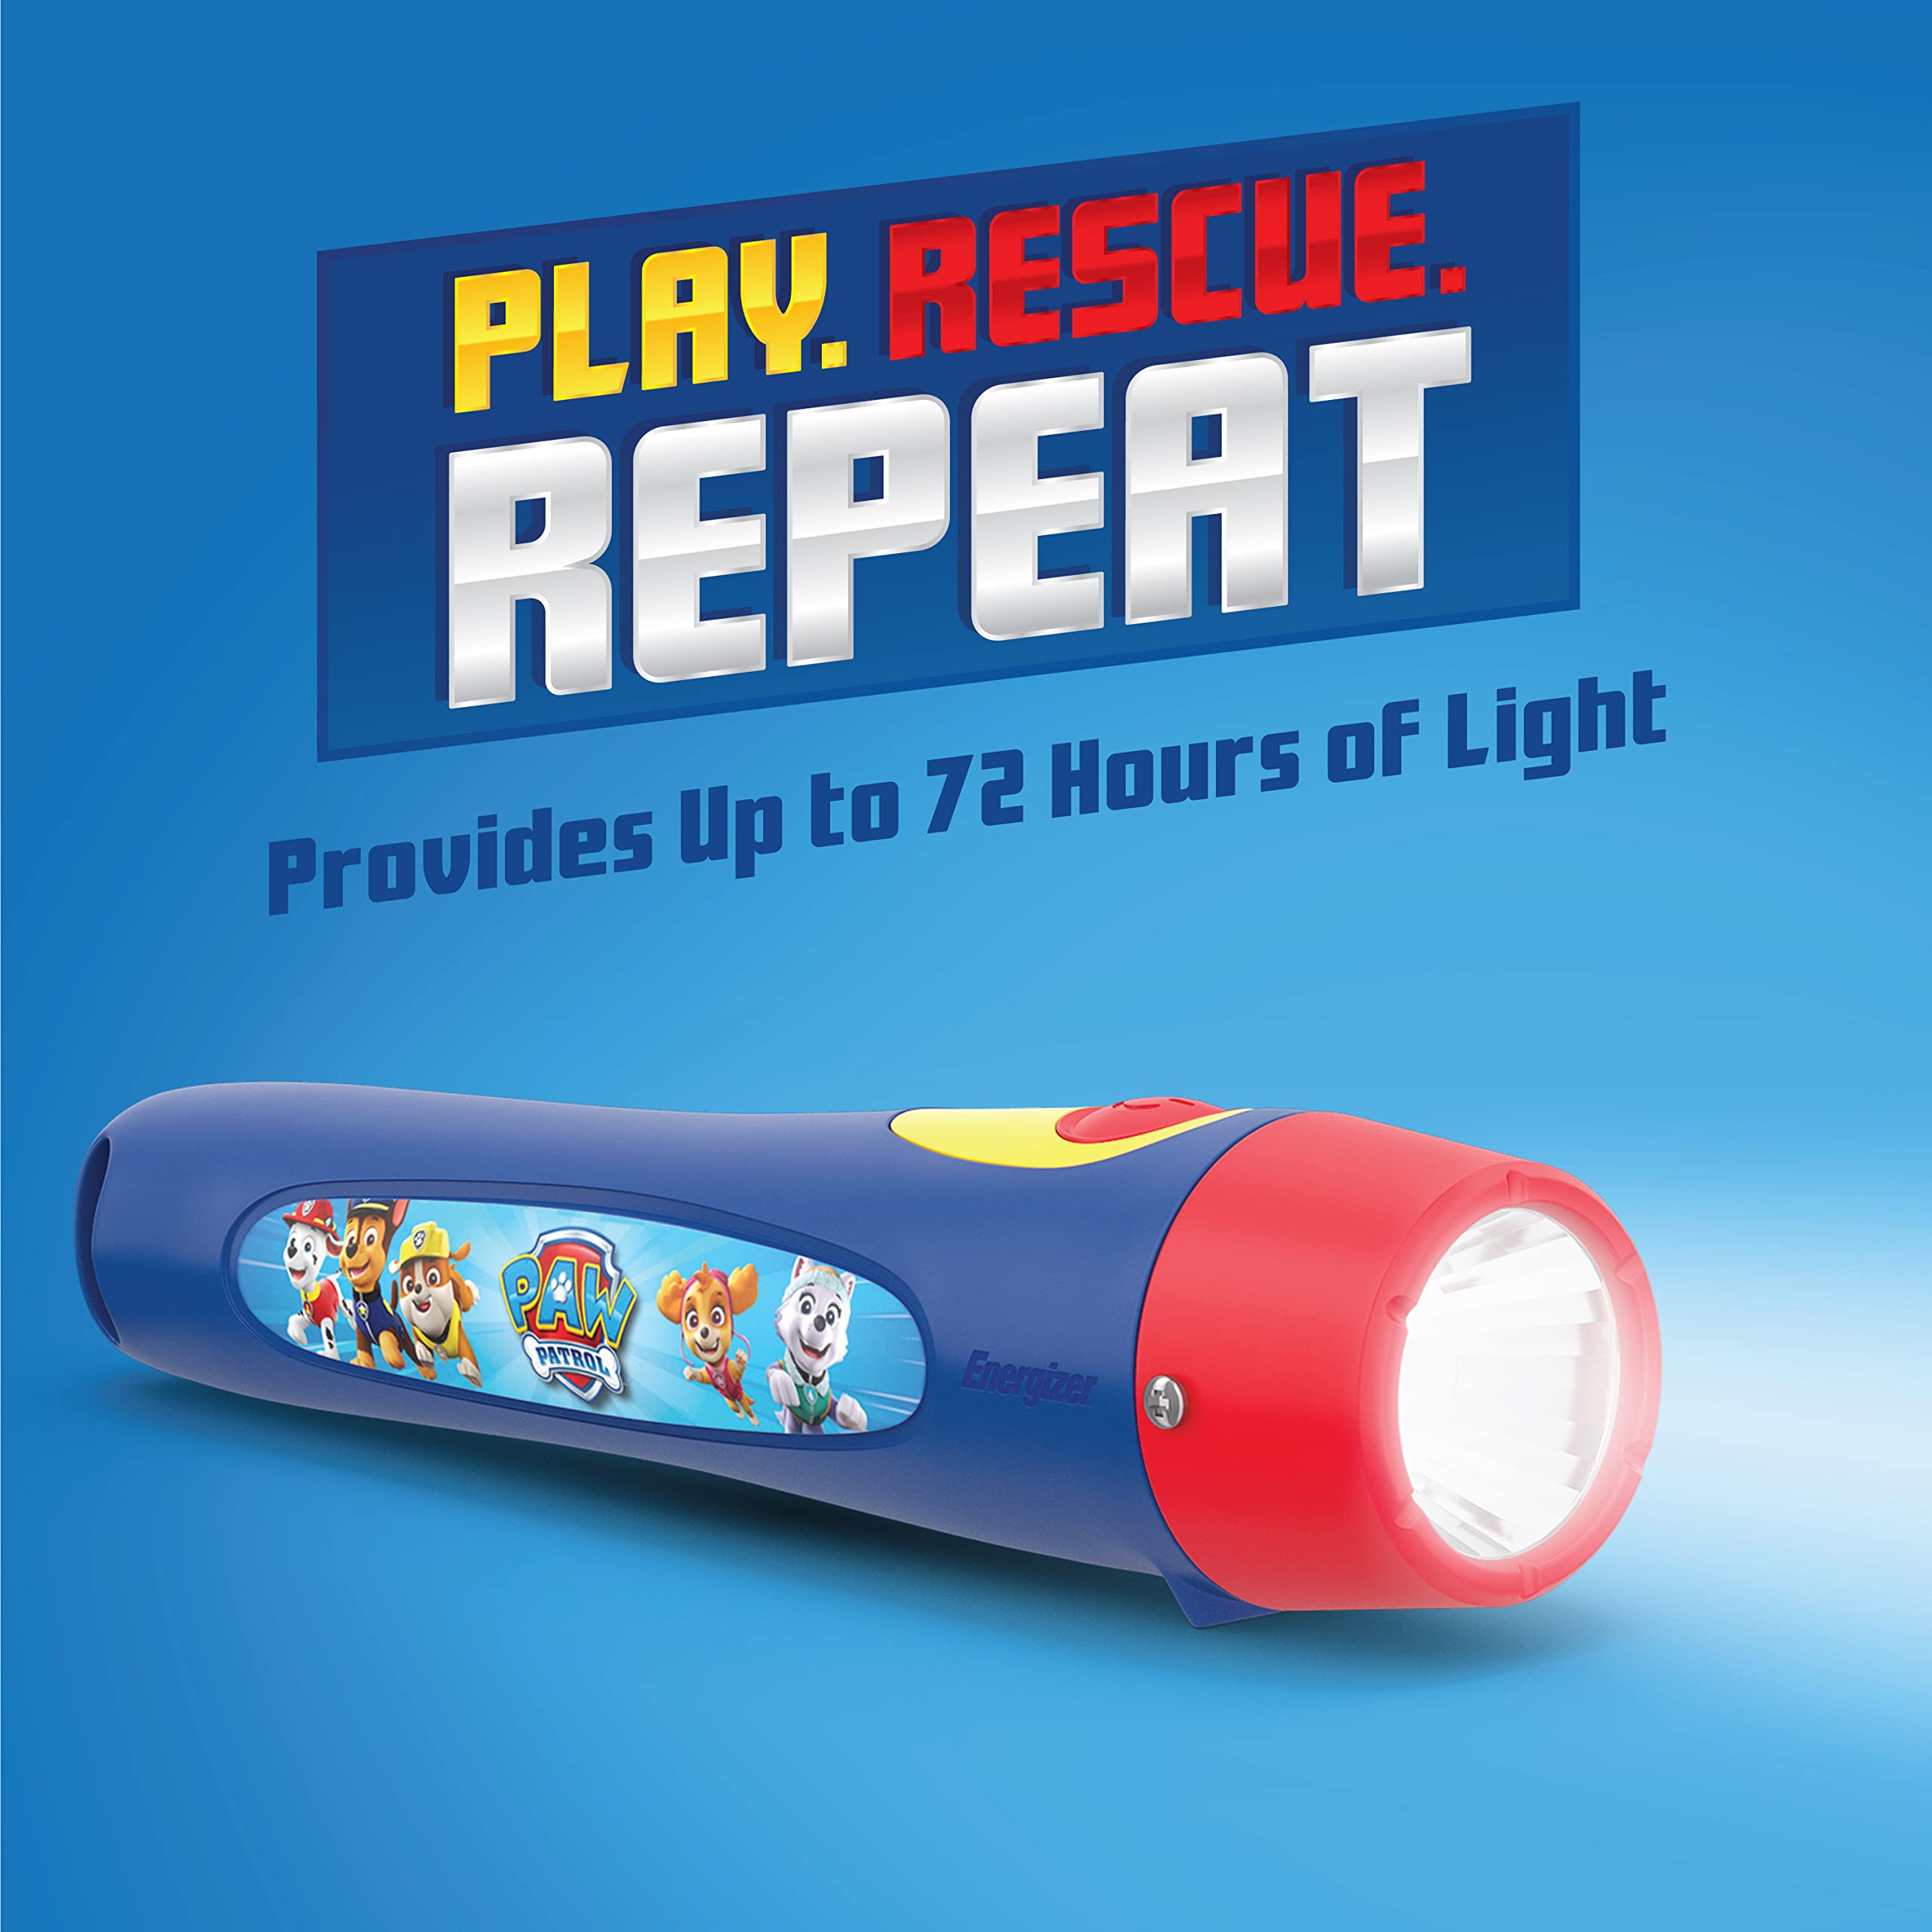 Energizer PAW Patrol Flashlights (2-Pack), Paw Patrol Toys for Boys and Girls, Great Flashlights for Kids (Batteries Included)